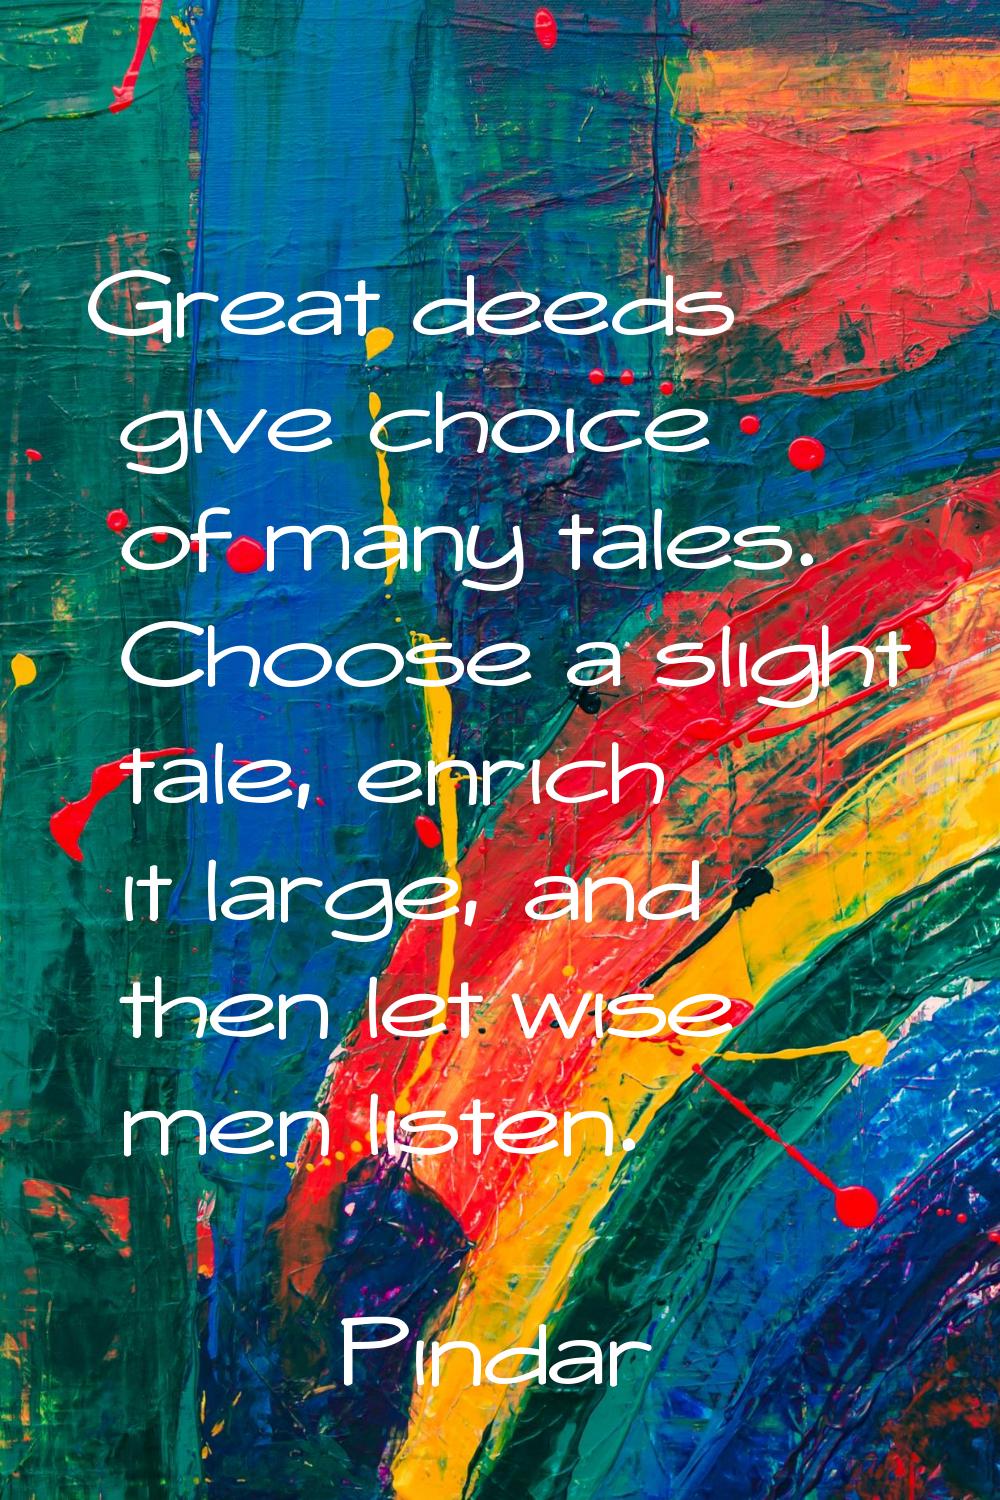 Great deeds give choice of many tales. Choose a slight tale, enrich it large, and then let wise men